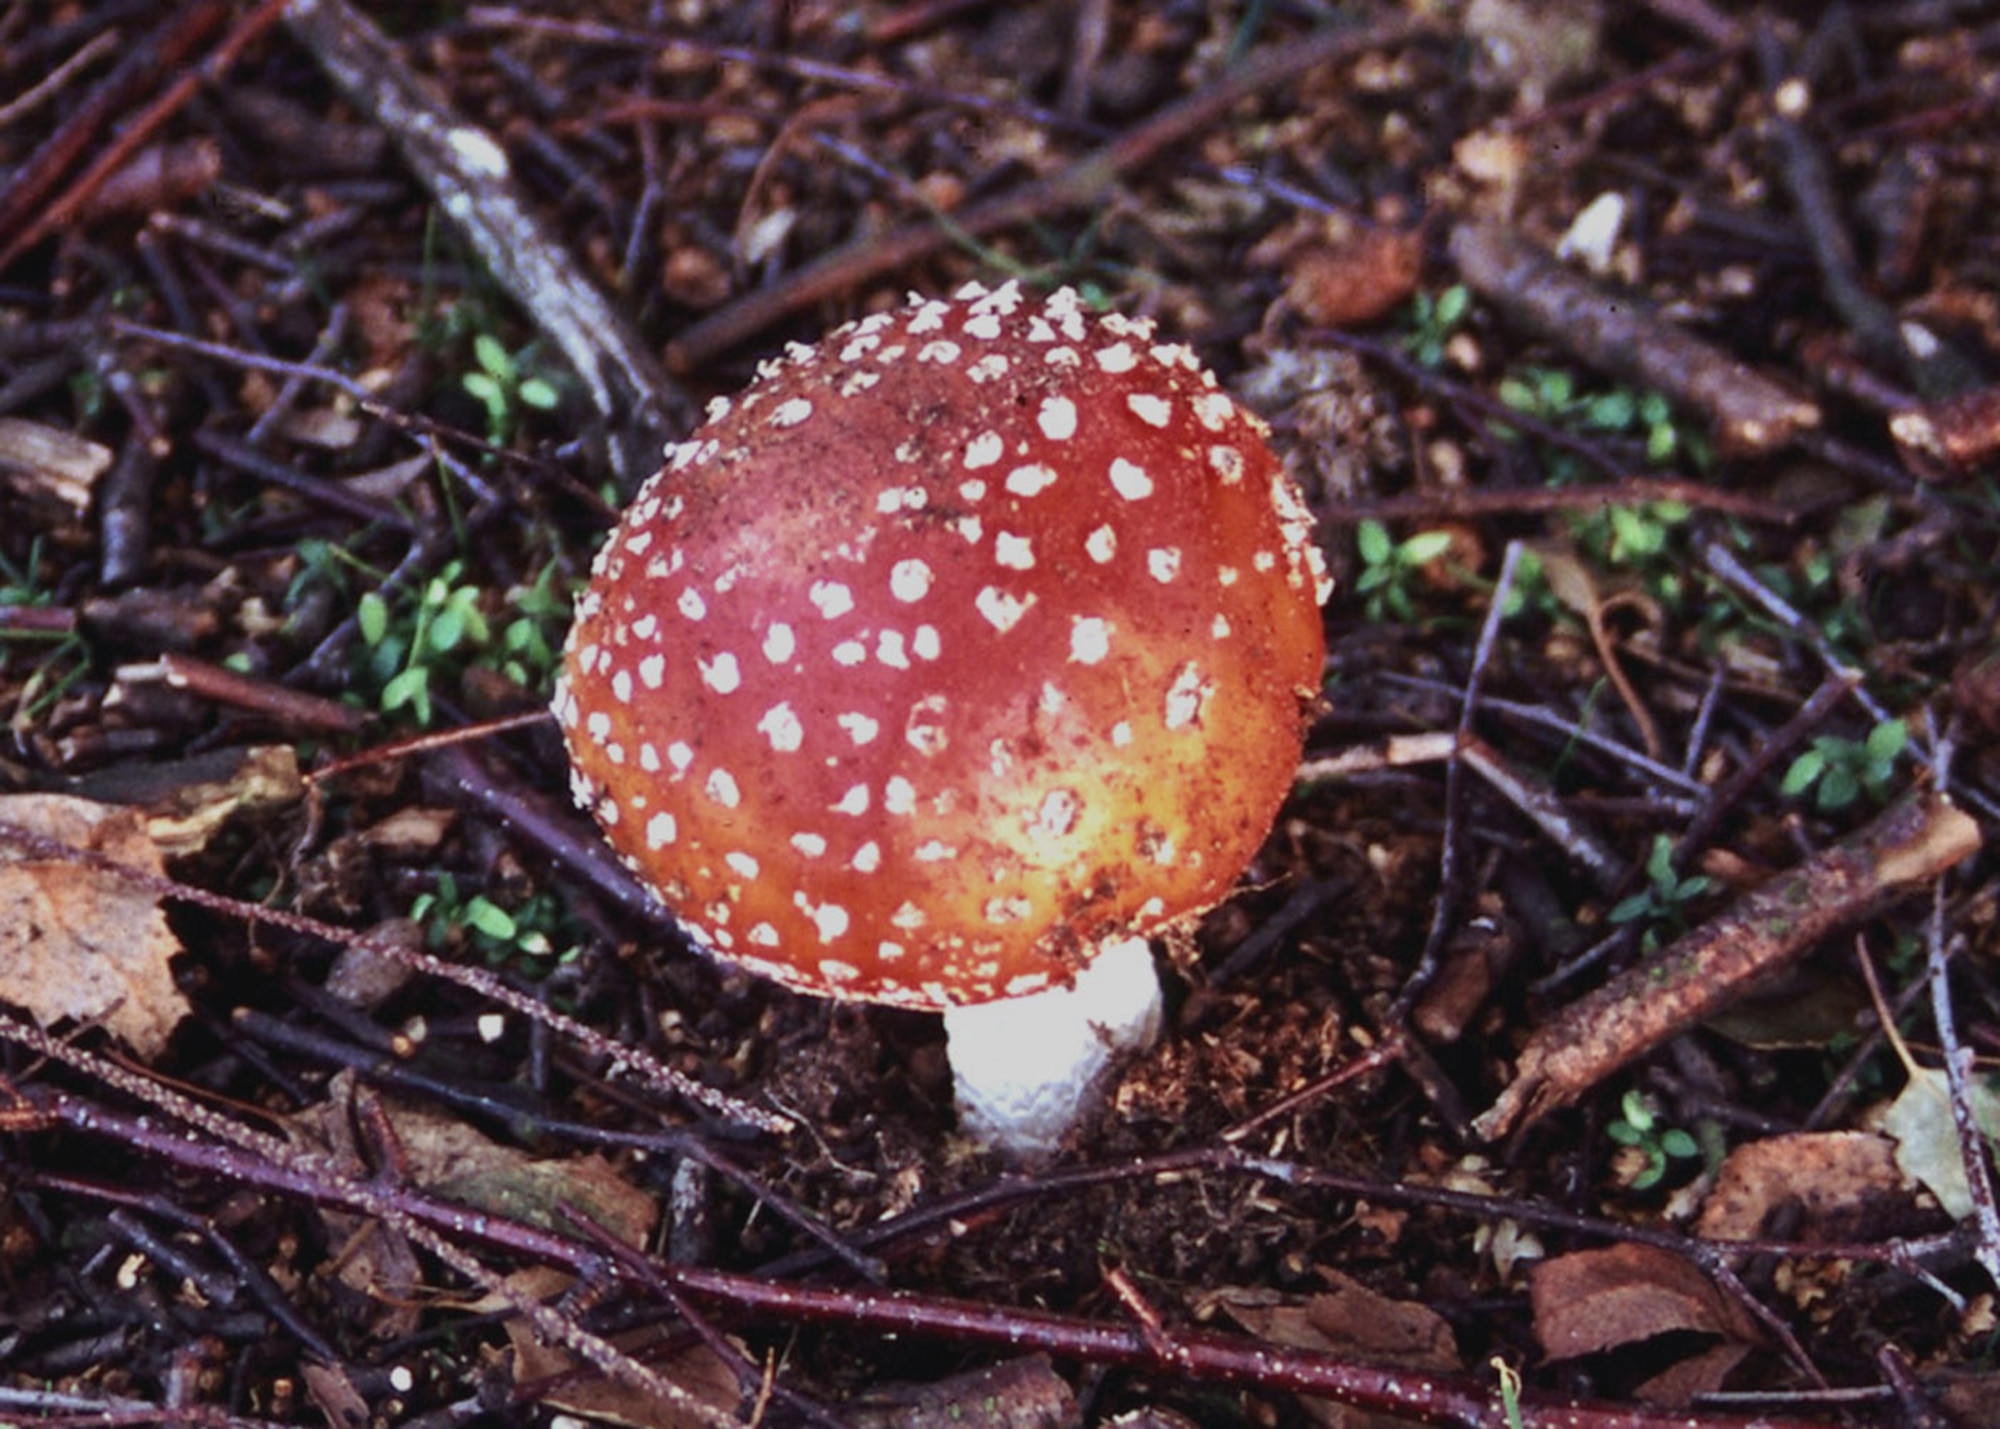 The poisonous Fly Agaric (U.S. Air Force photo by Judith Wakelam)